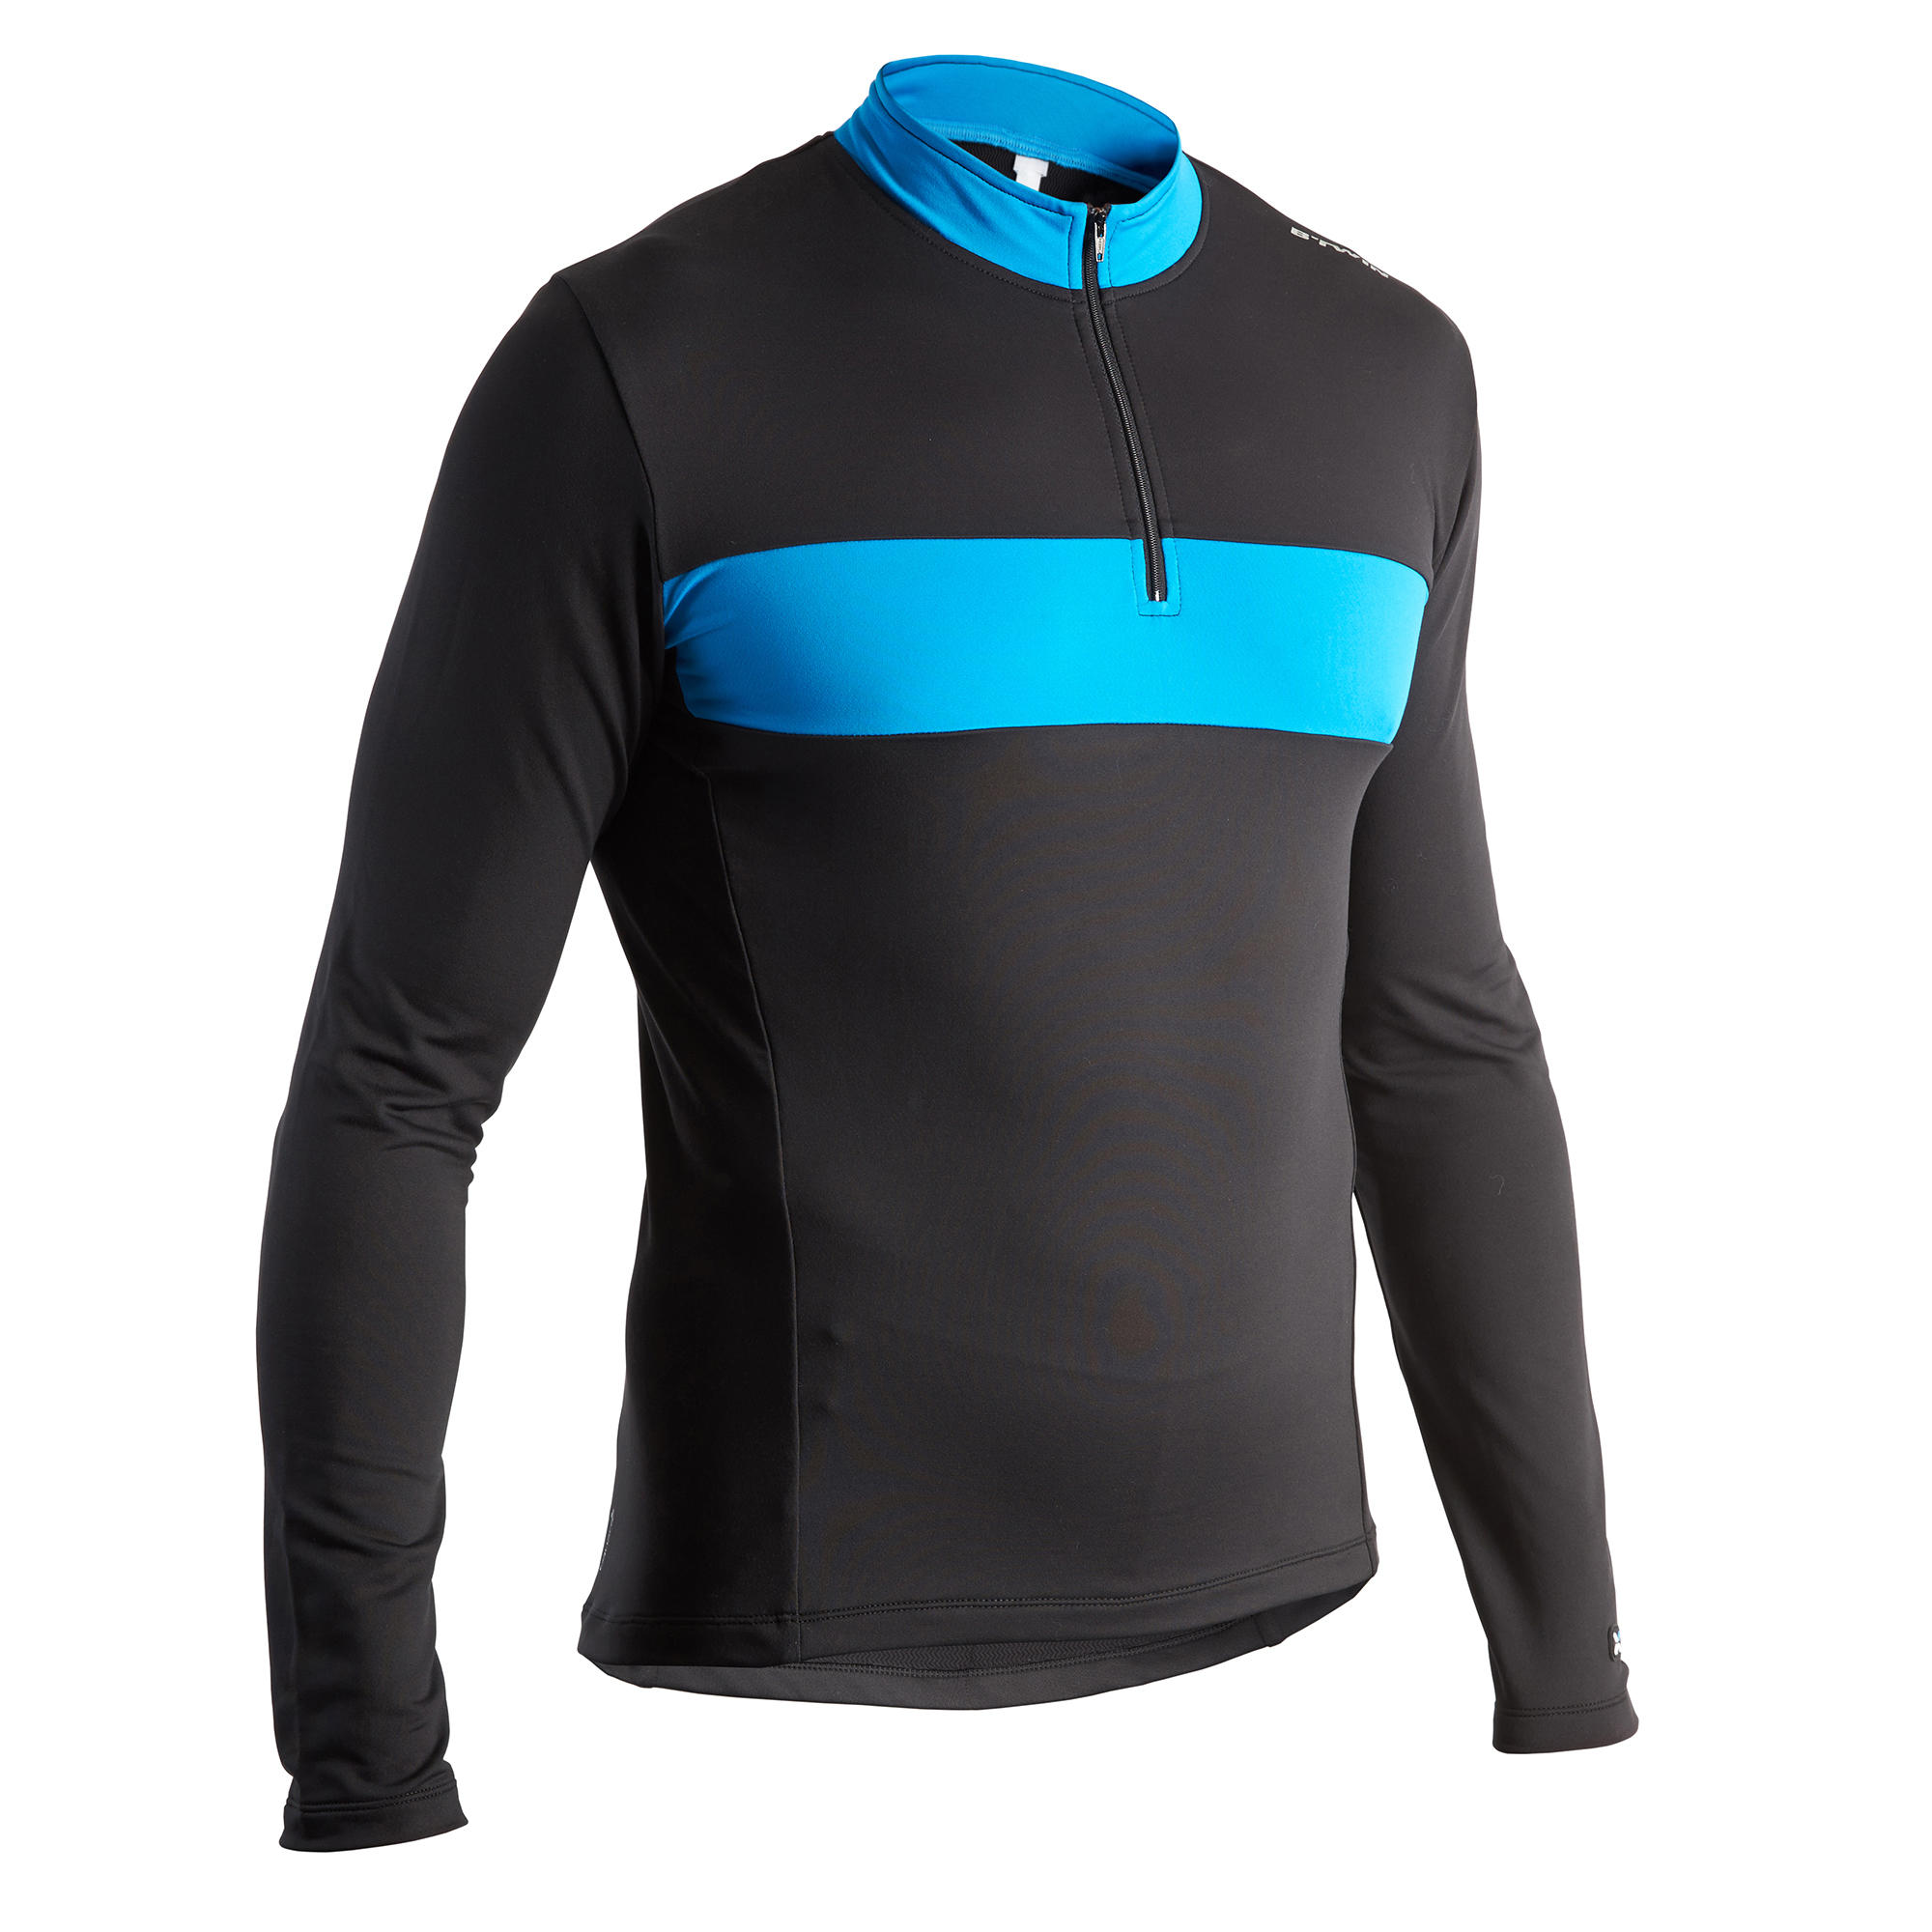 BTWIN 300 Long-Sleeved Cycling Jersey - Black/Blue